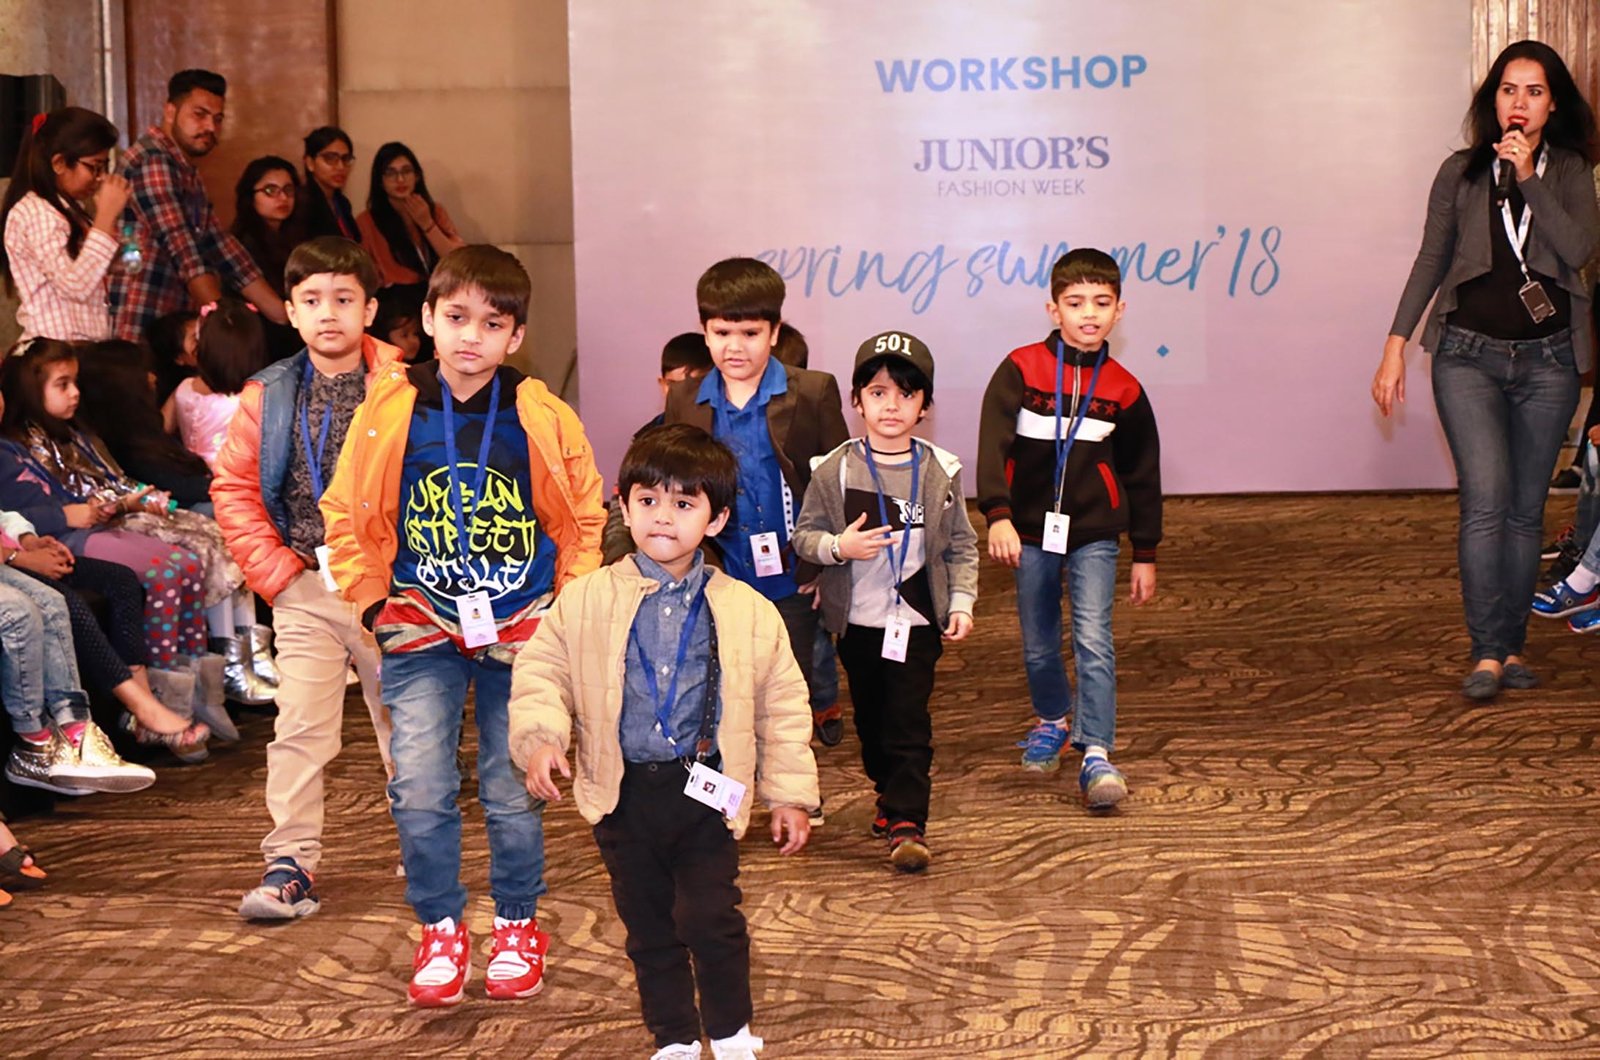 Kids In 4-14 Age Group To Sparkle In Groovy New Styles, Lifeinchd